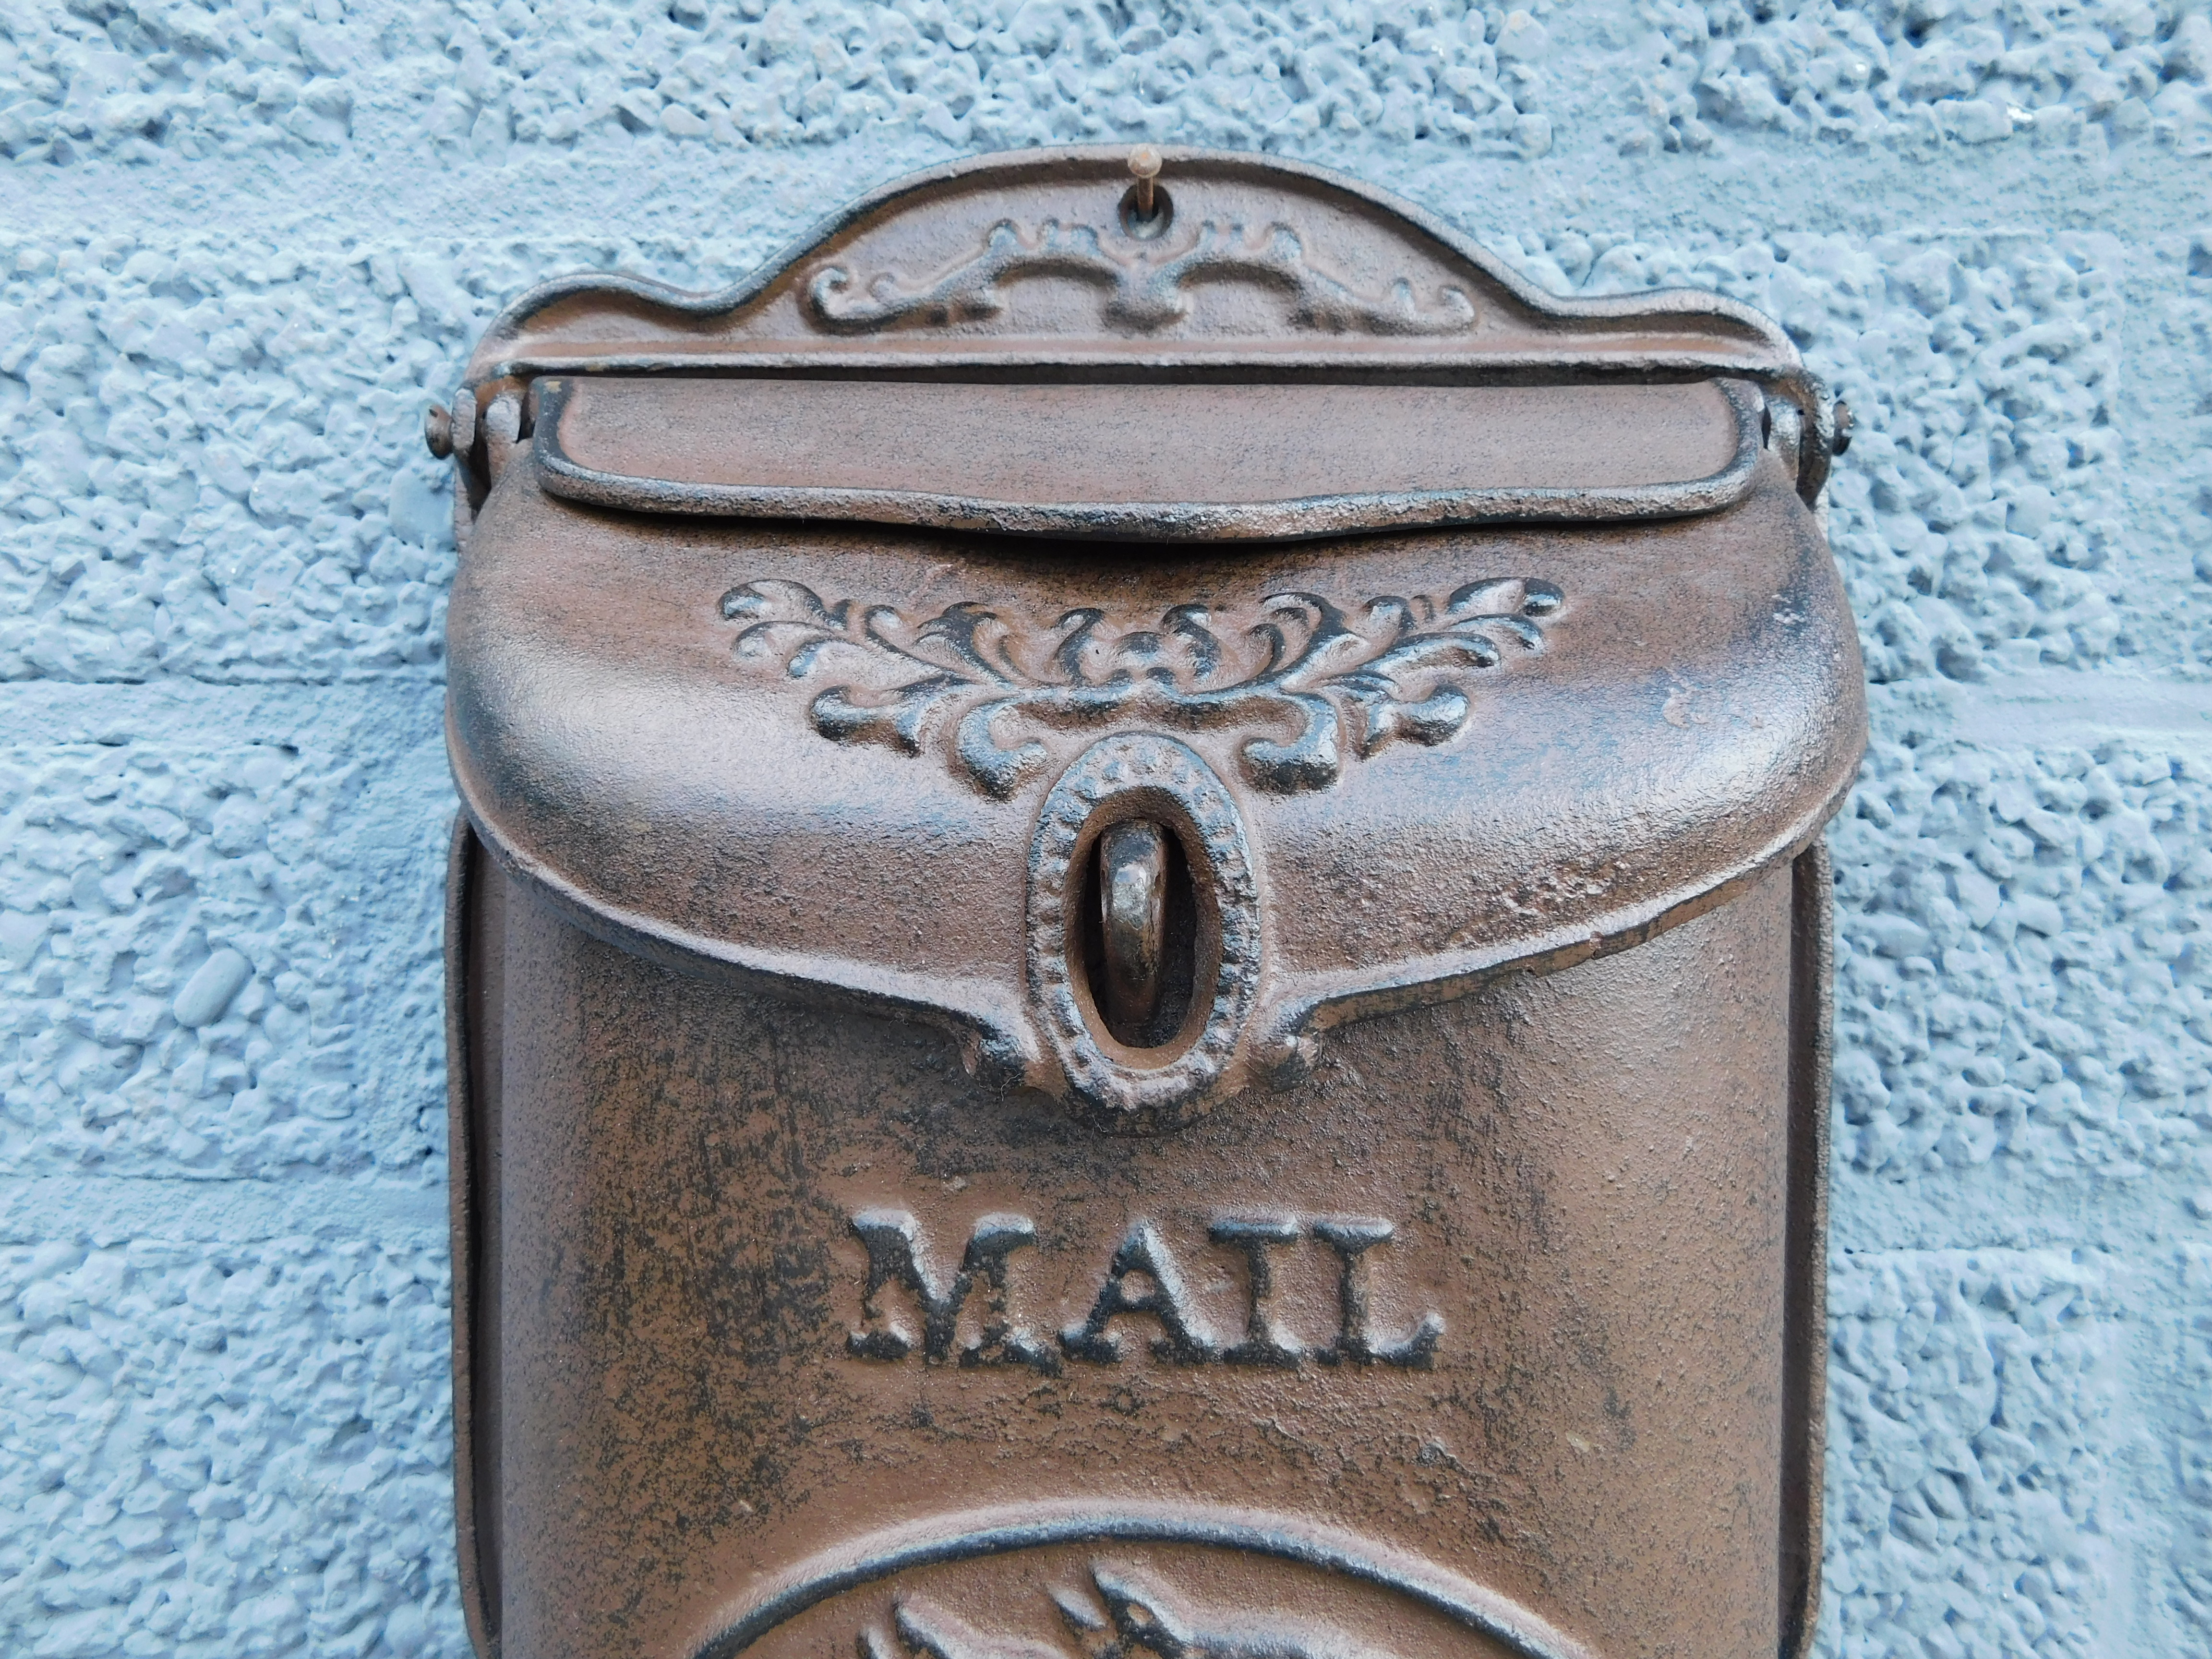 Letterbox - mailbox - cast iron - brown